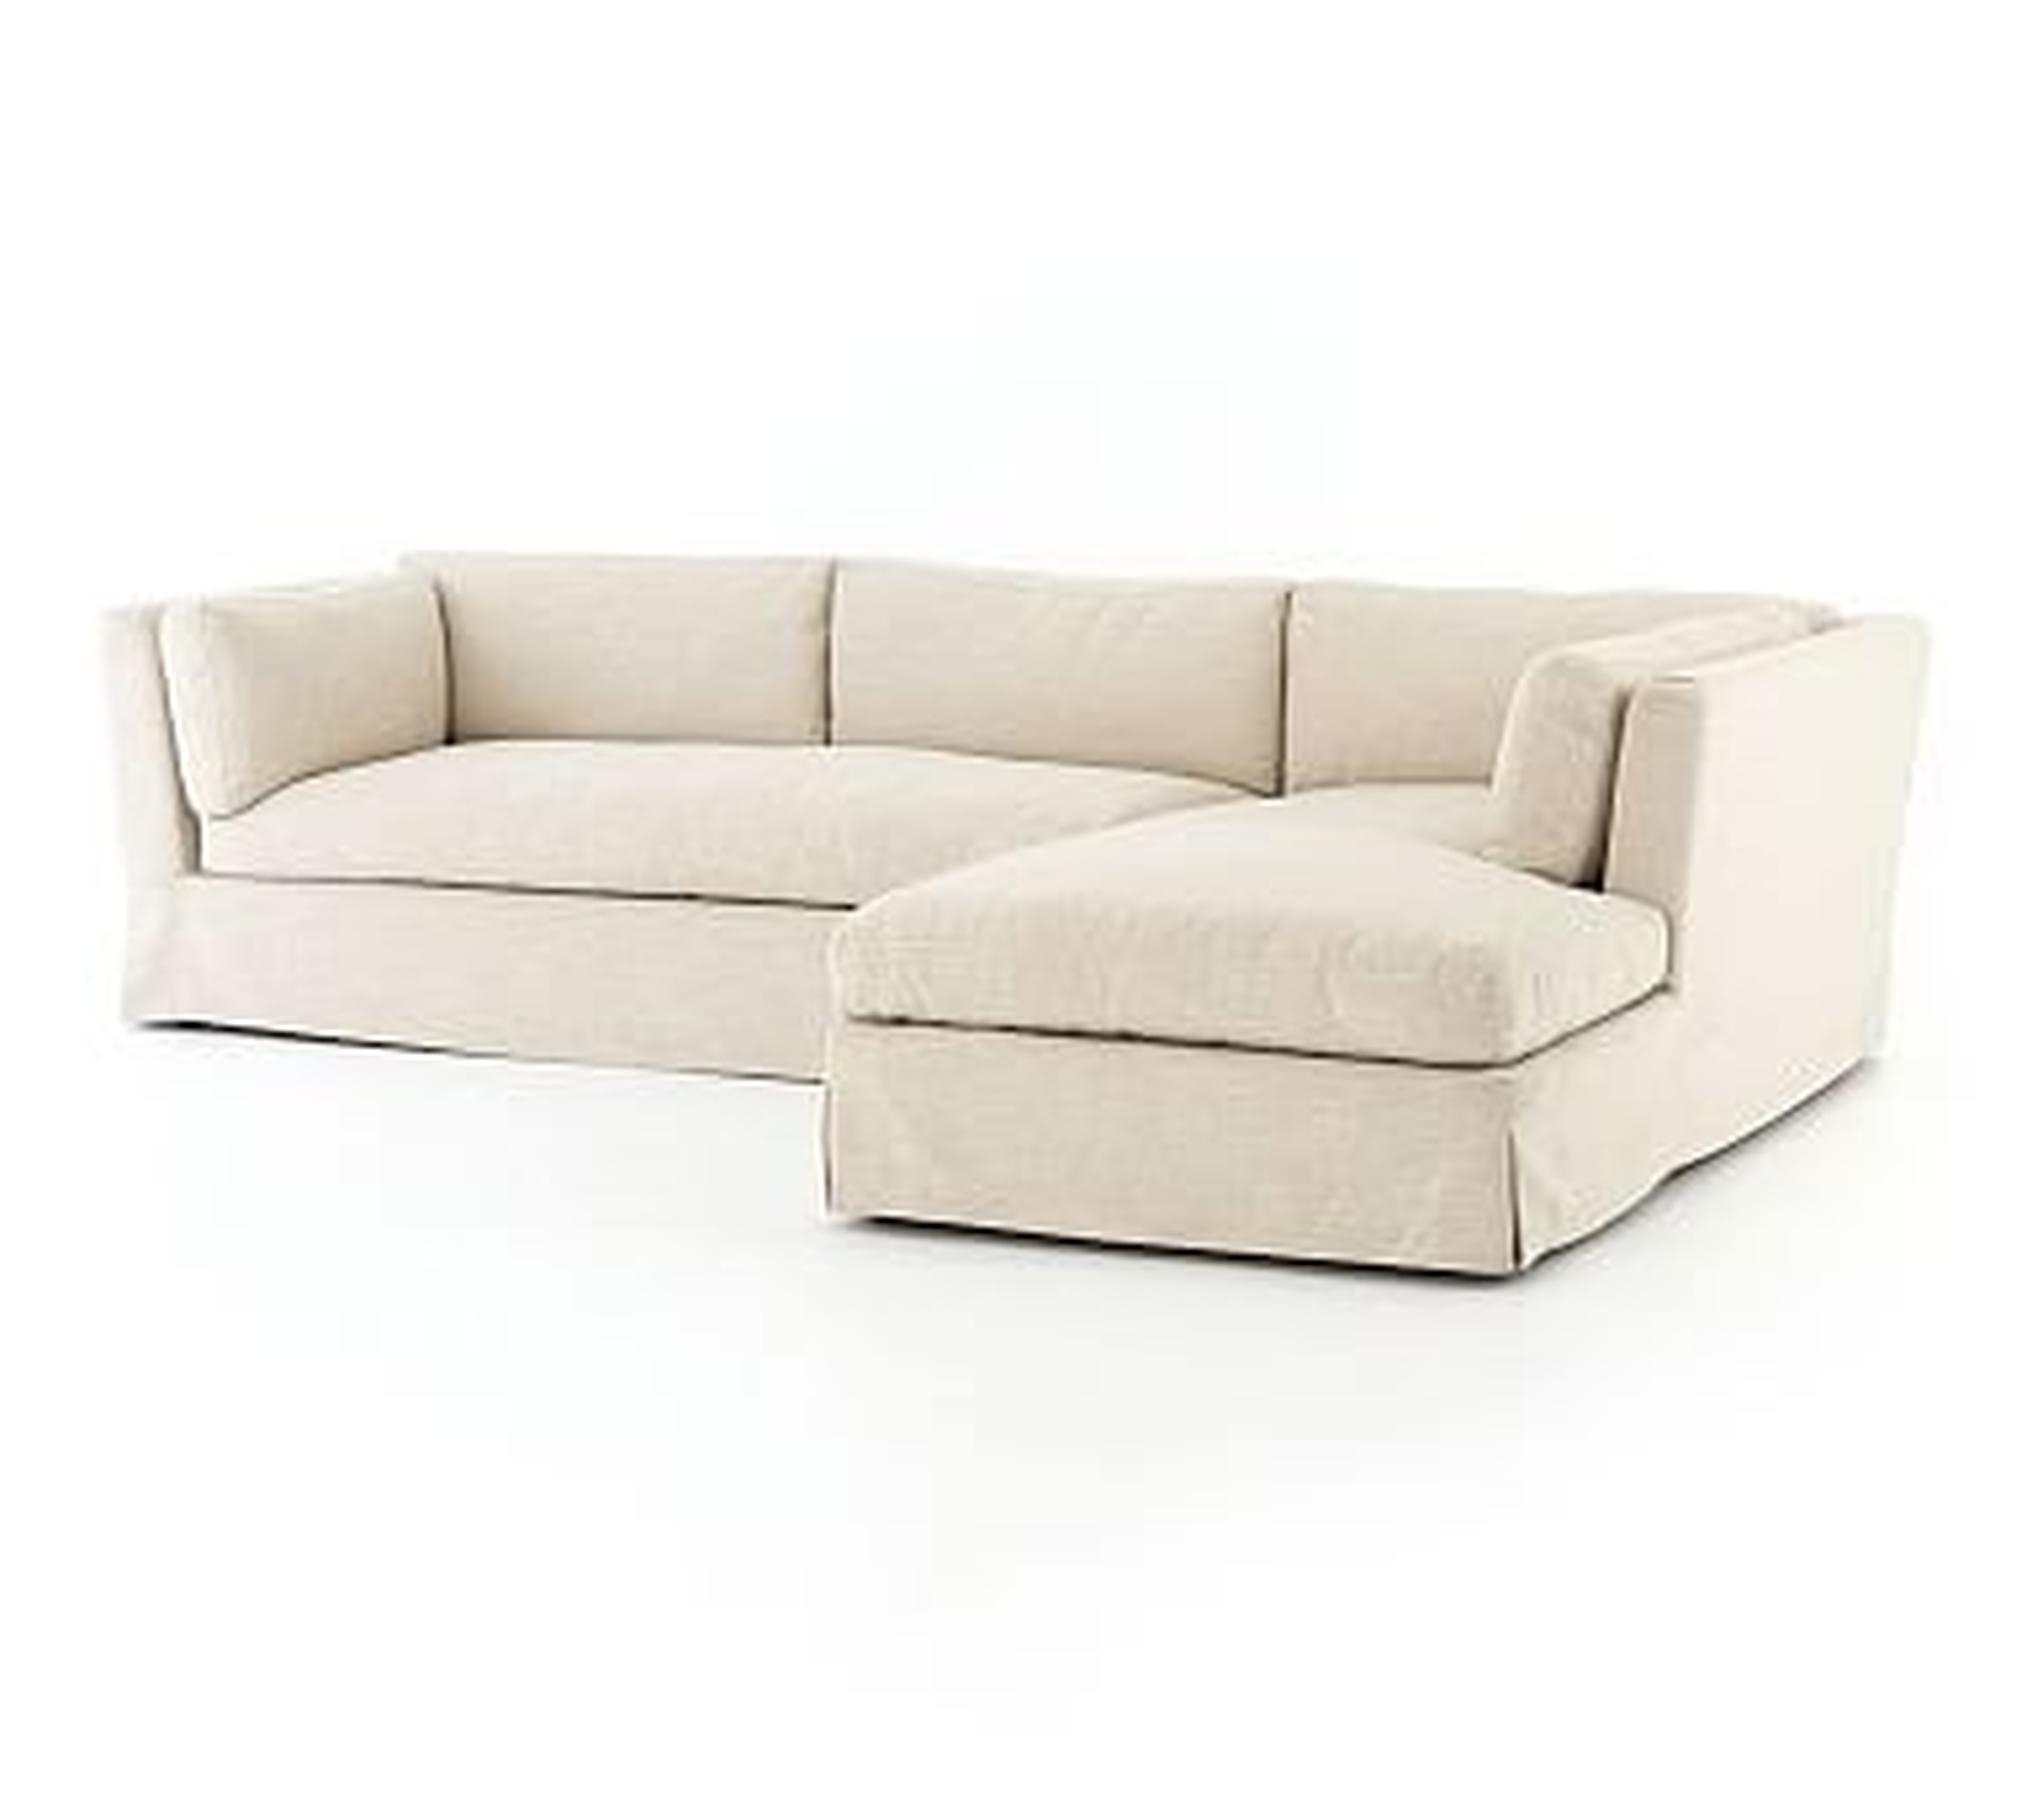 Dawn Slipcovered Right Arm Sofa with Chaise Sectional, Polyester Wrapped Cushions, Performance Heathered Tweed Pebble - Pottery Barn